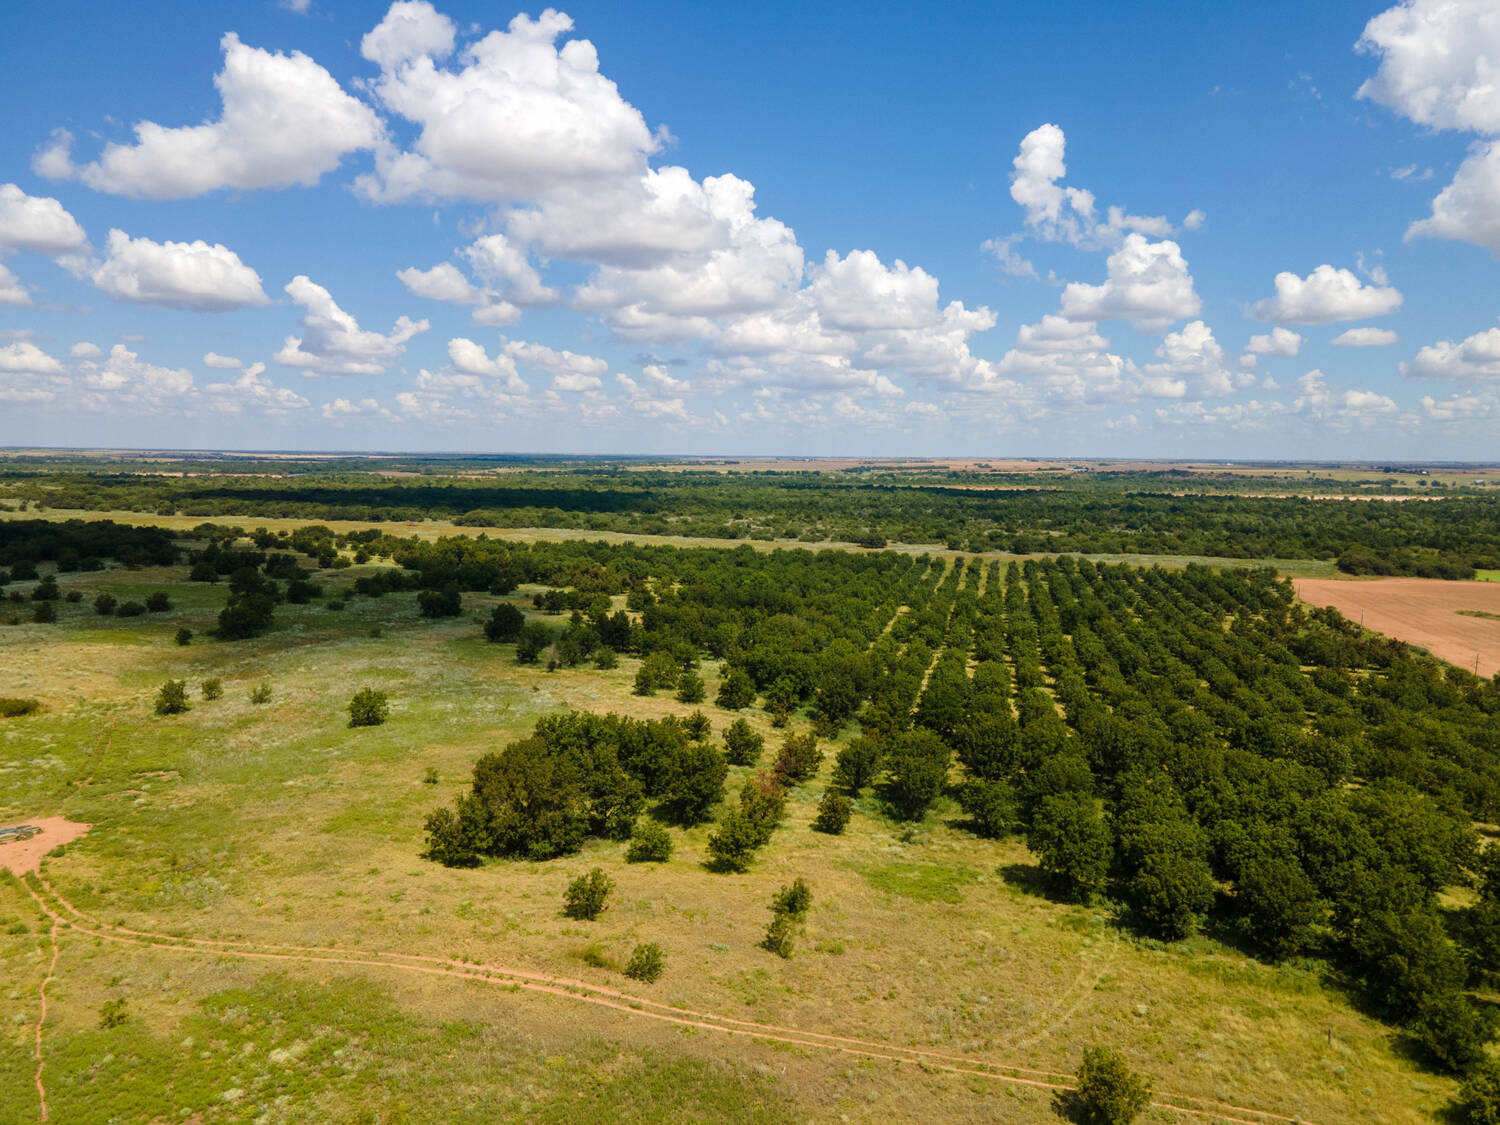 The-Pecan-Tract-Clay-County-Pecan-Orchard-Hunting-Ranch-TX-Republic-Ranches-Bryan-Pickens-13-of-15